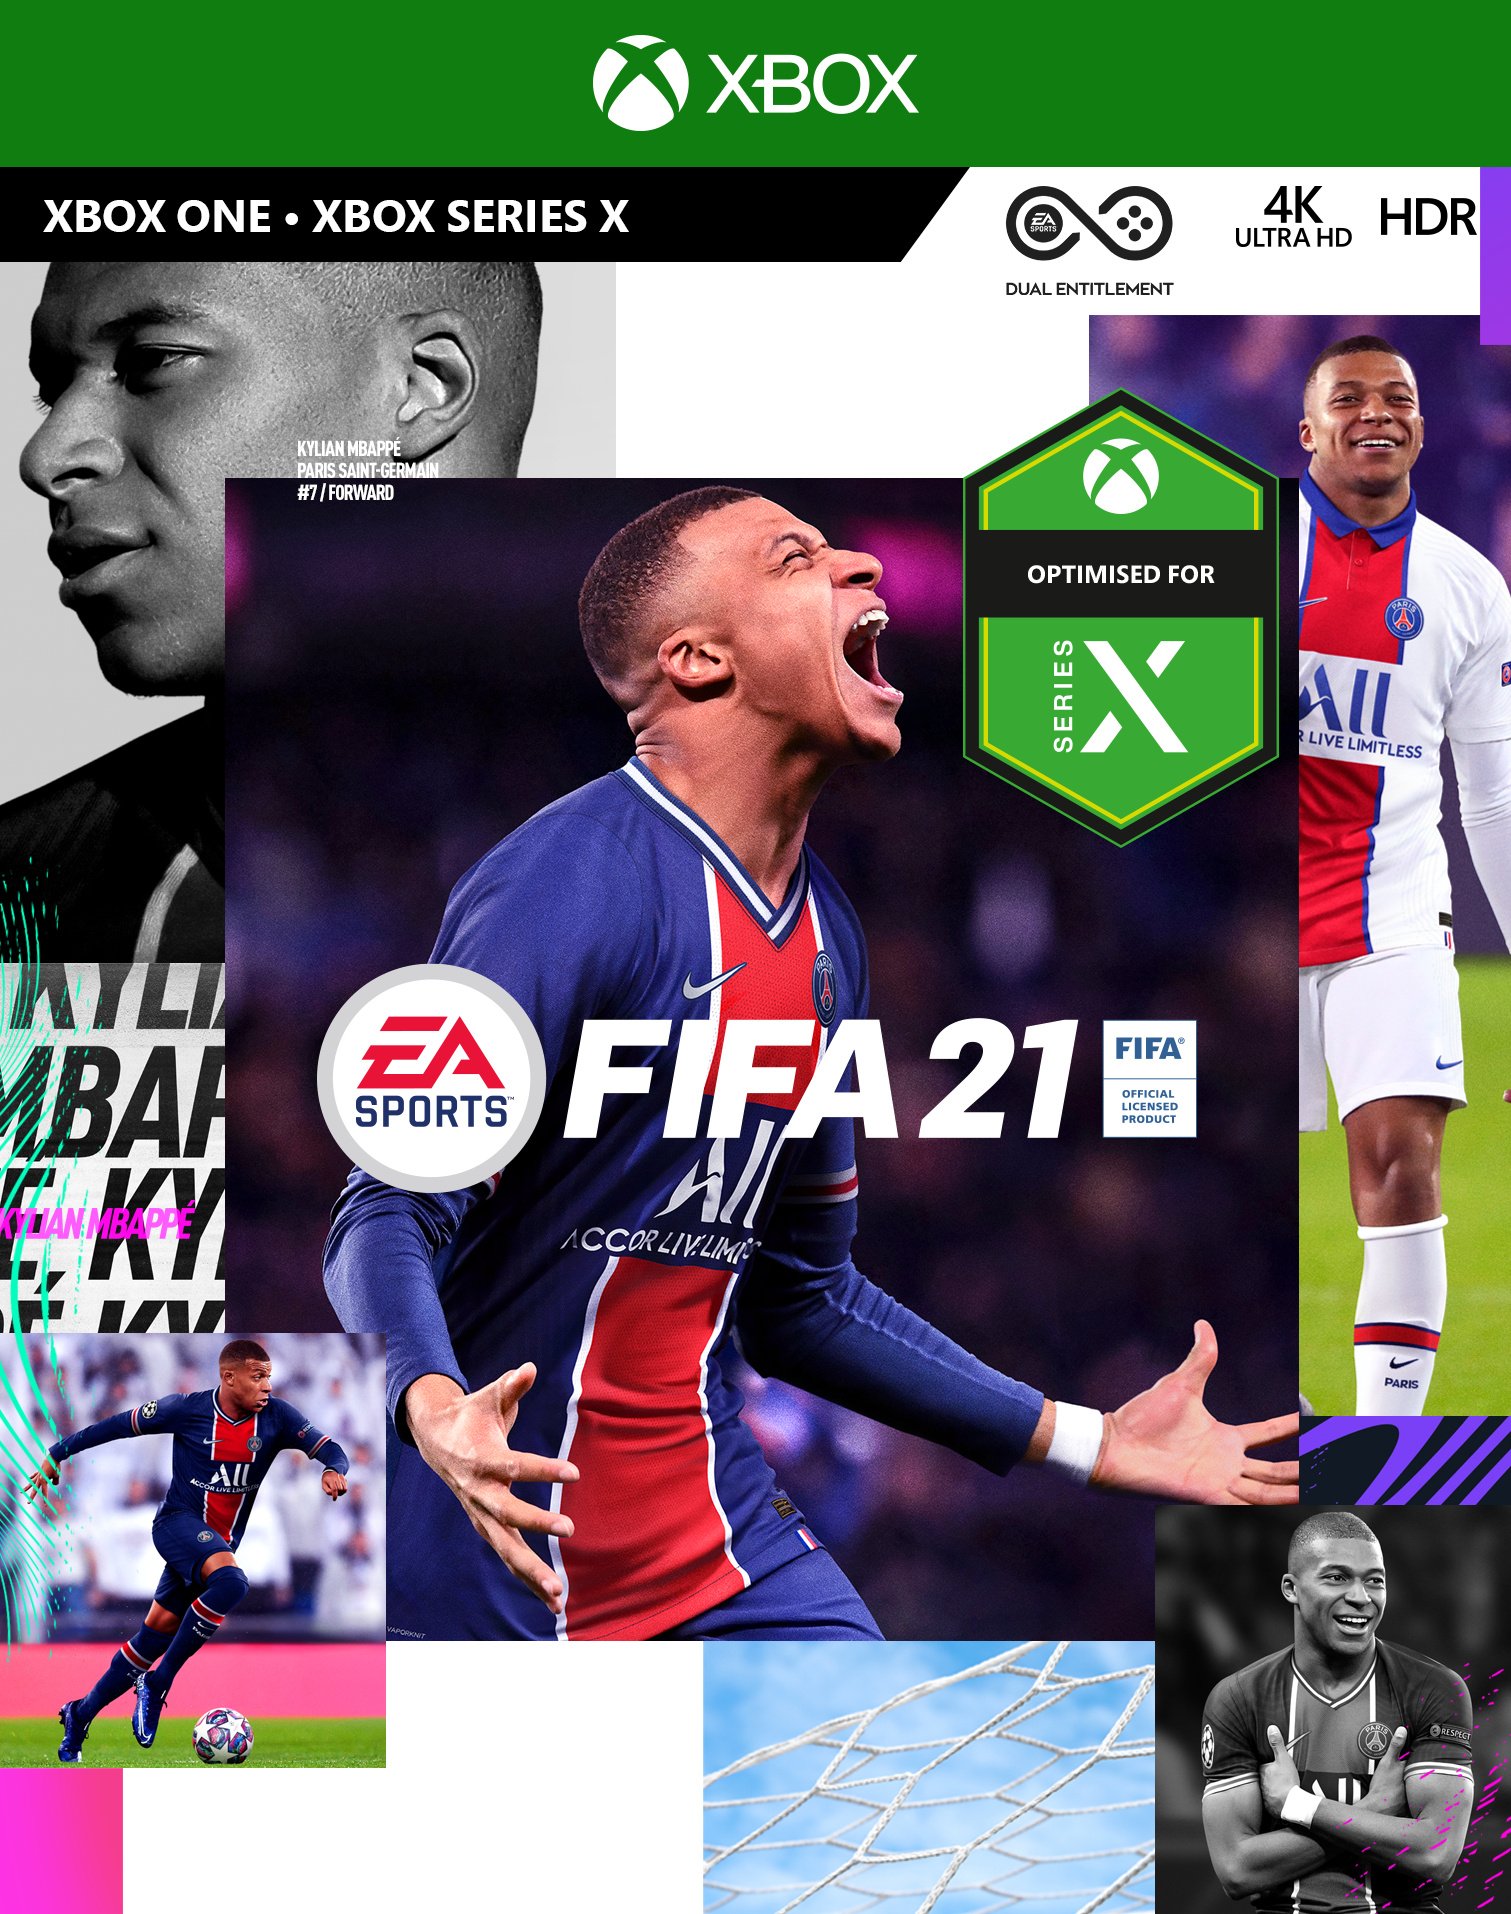 Kylian Mbappe Revealed As FIFA 21 Cover Star - Xbox News